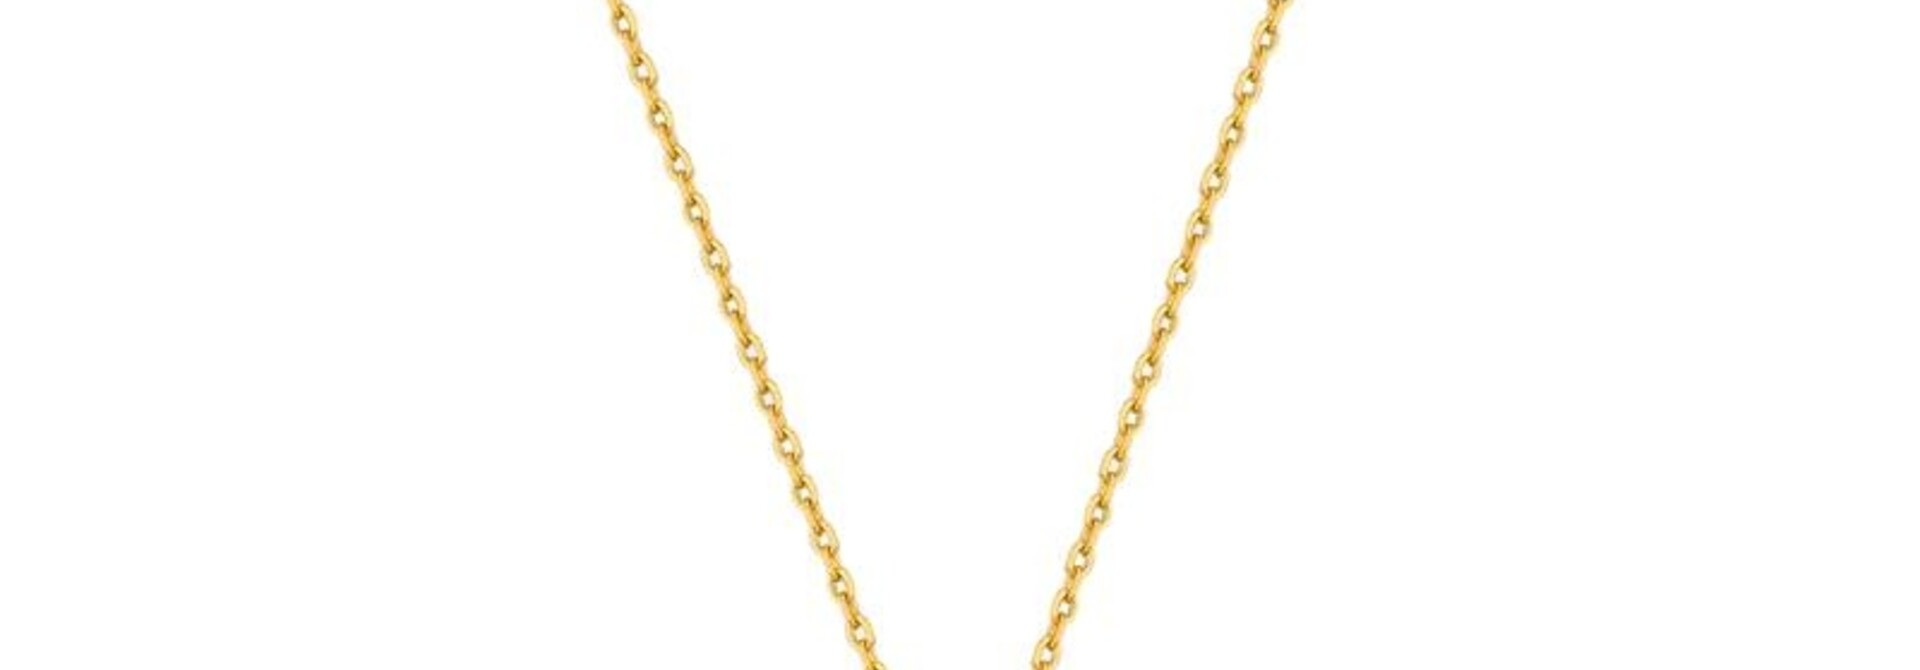 Navy Blue Enamel  Twisted Pendant Ketting - Gold plated